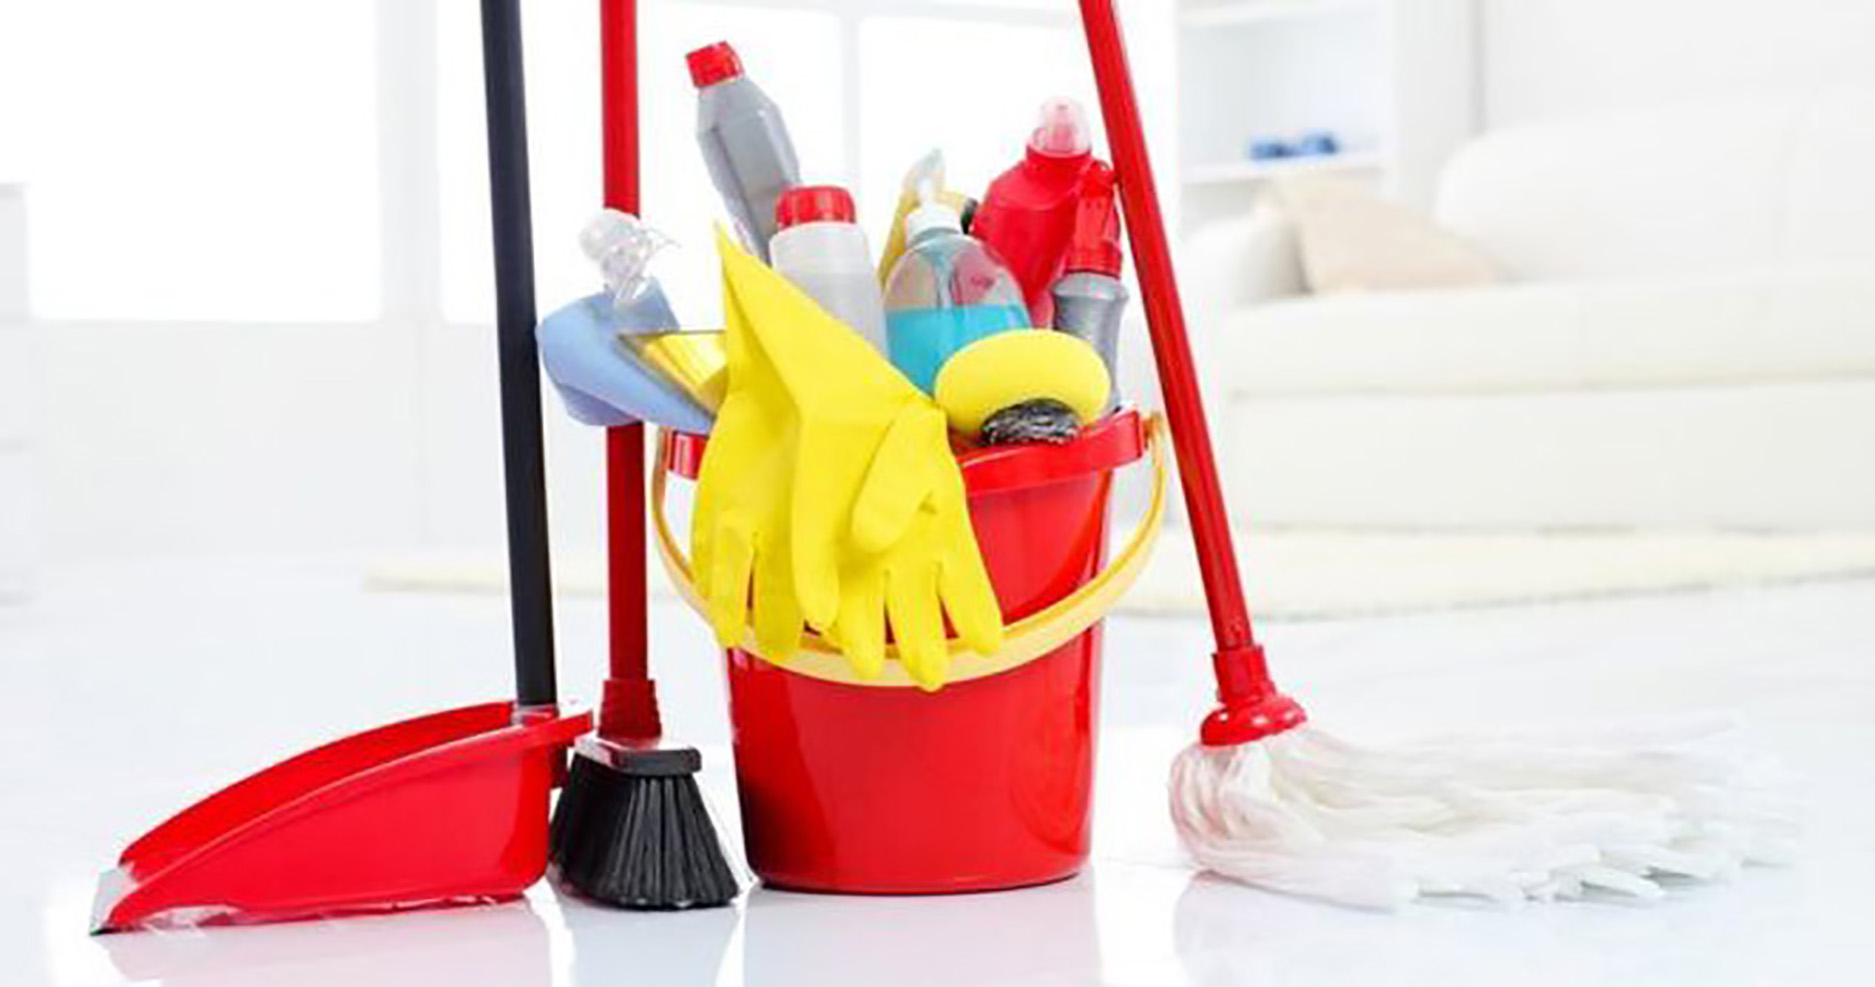 Cleaning products ‘affect lung health